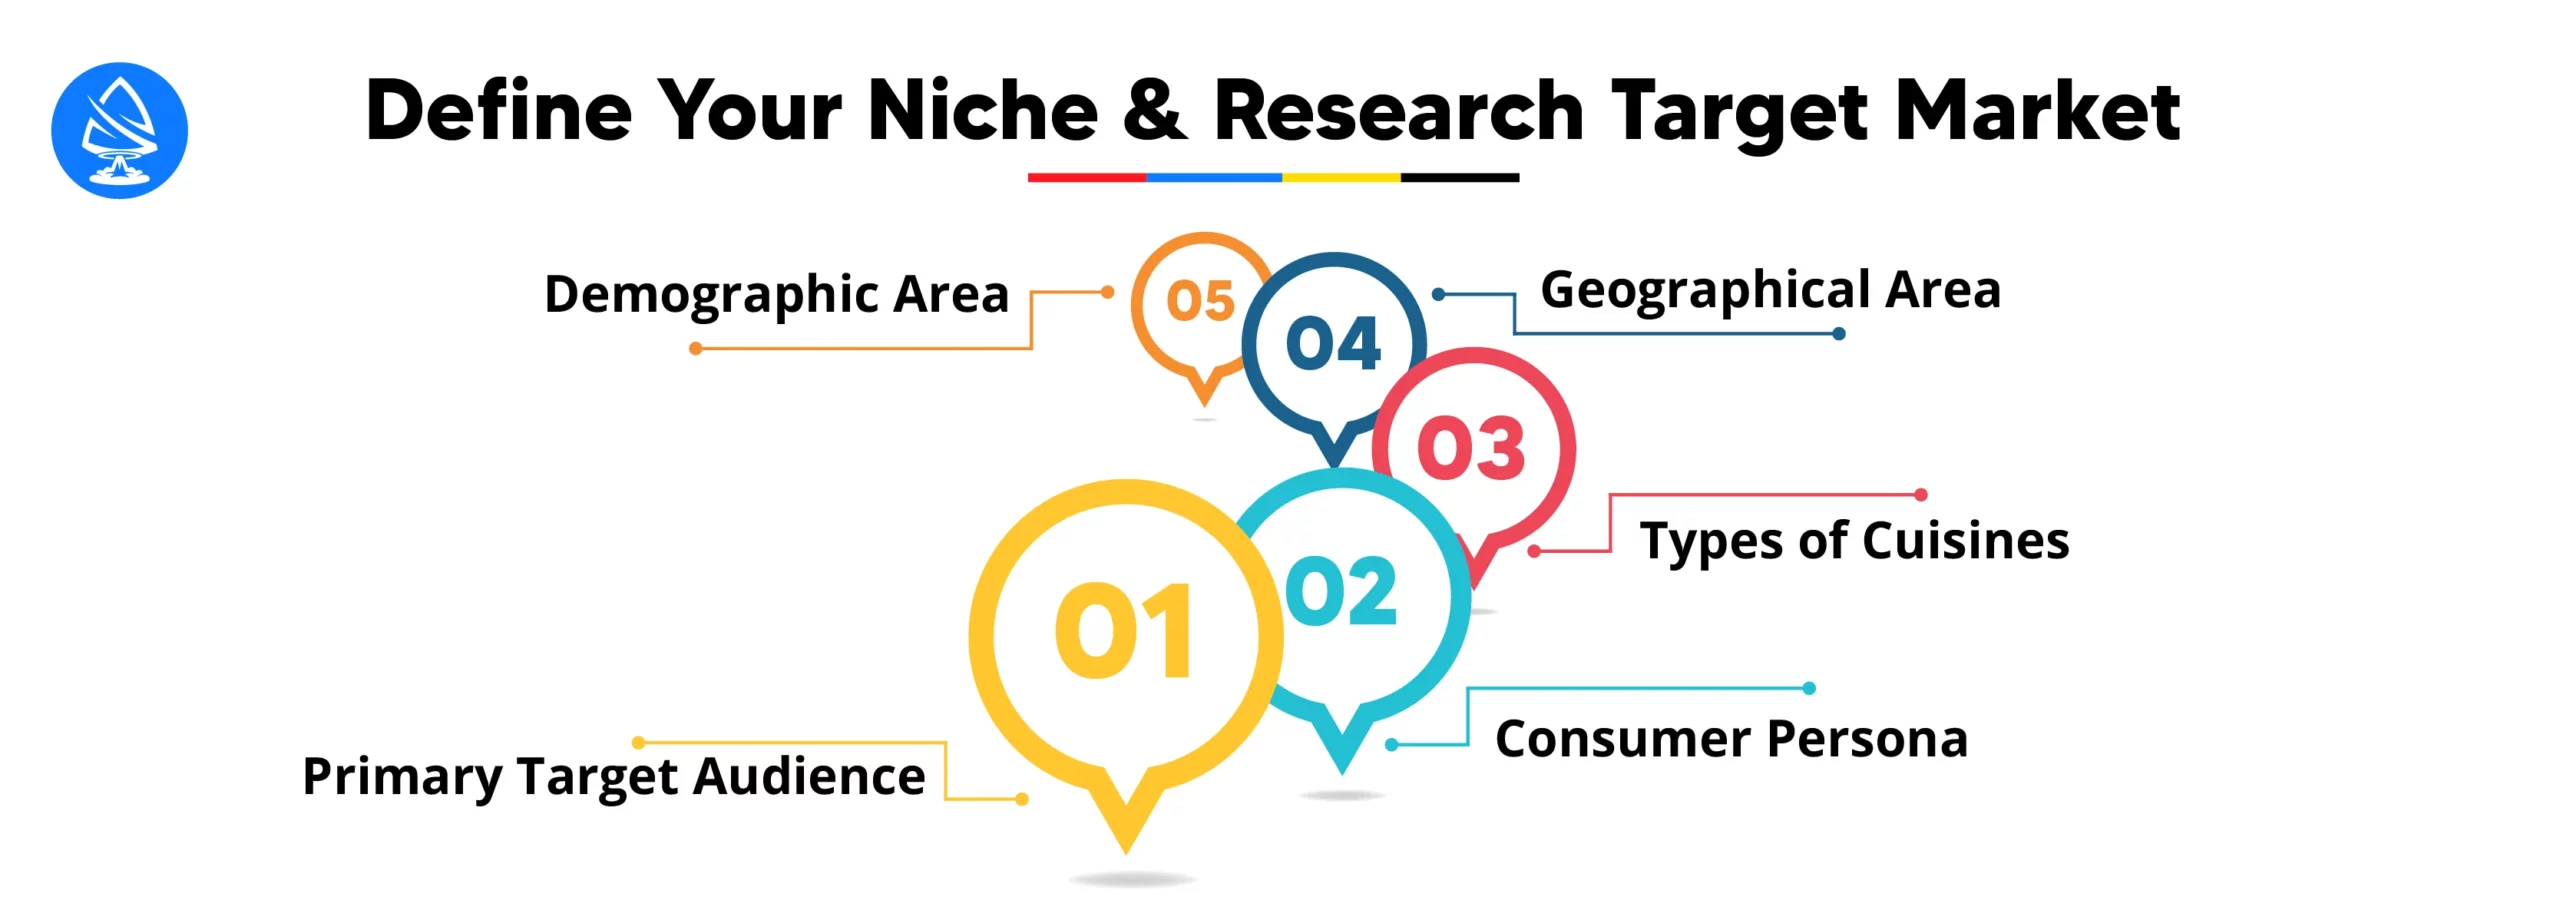 Define Your Niche and Research Target Market